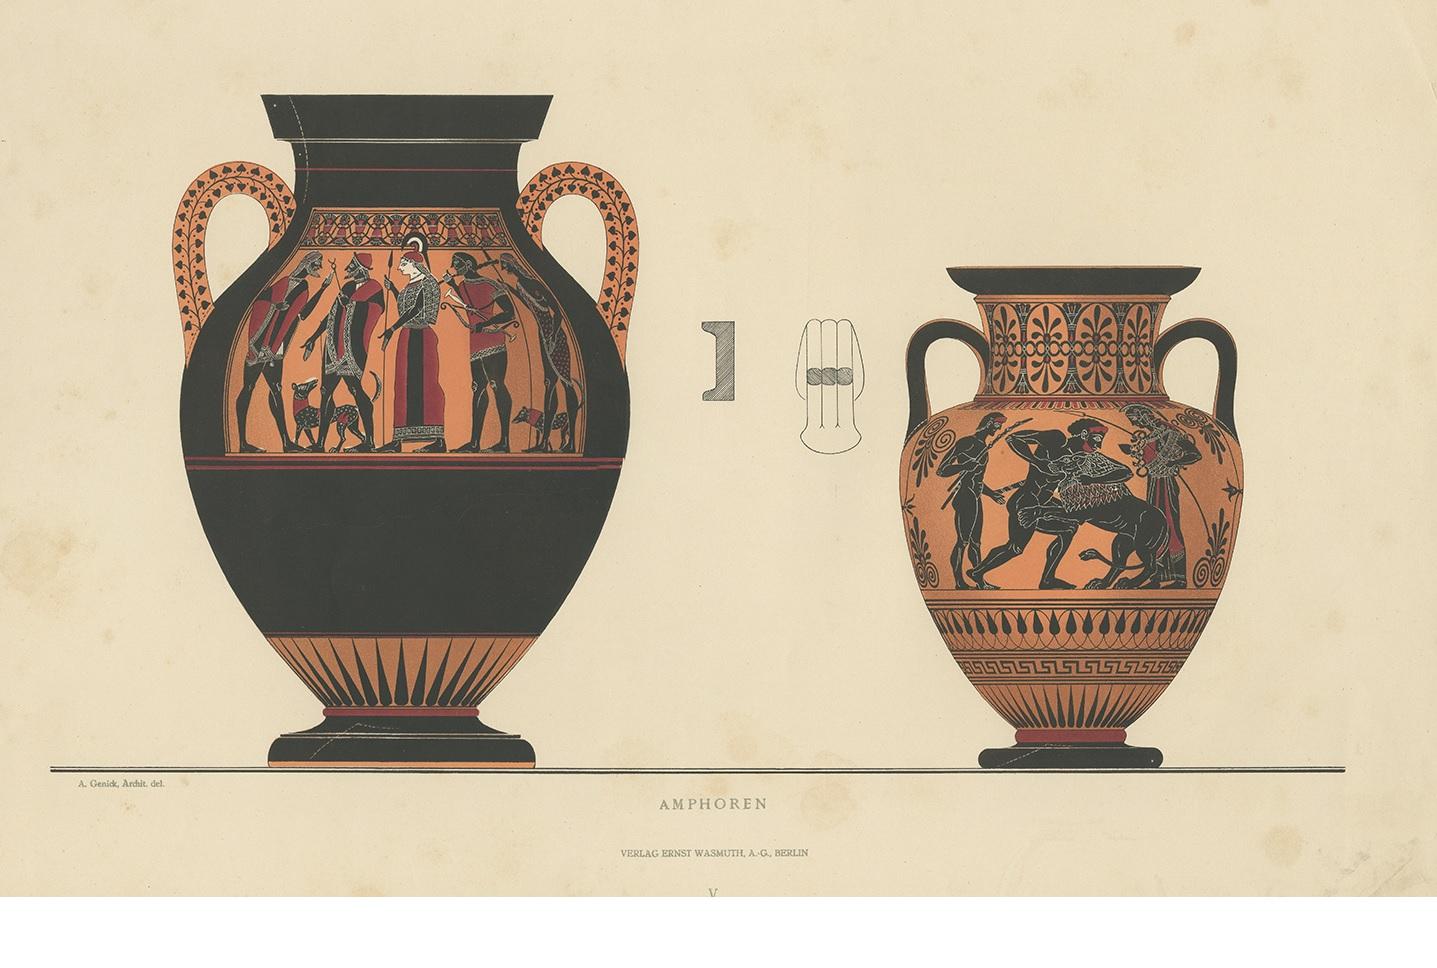 Antique print titled 'Amphoren'. Color-printed large lithograph by Ernst Wasmuth depicting a Greek amphorae. This print originates from 'Griechische Keramik' by A. Genick. Albert Genick, an architect by training, was one of the leading German